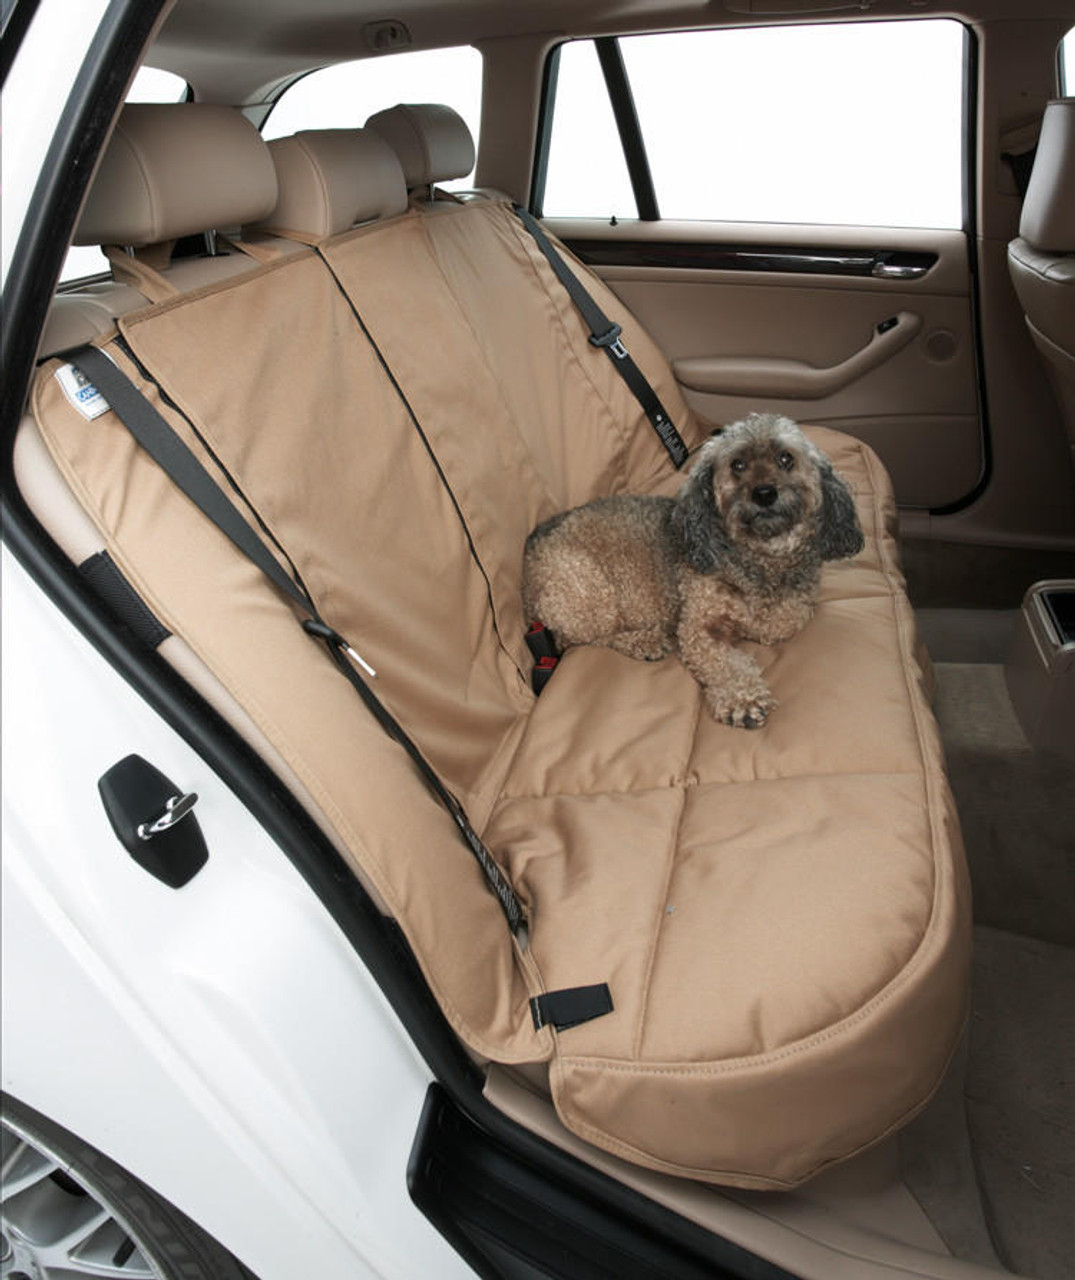 https://cdn11.bigcommerce.com/s-ndtdat03b2/images/stencil/1280x1280/products/6459/16845/canine-covers-custom-rear-seat-protector__76789.1663862875.jpg?c=1